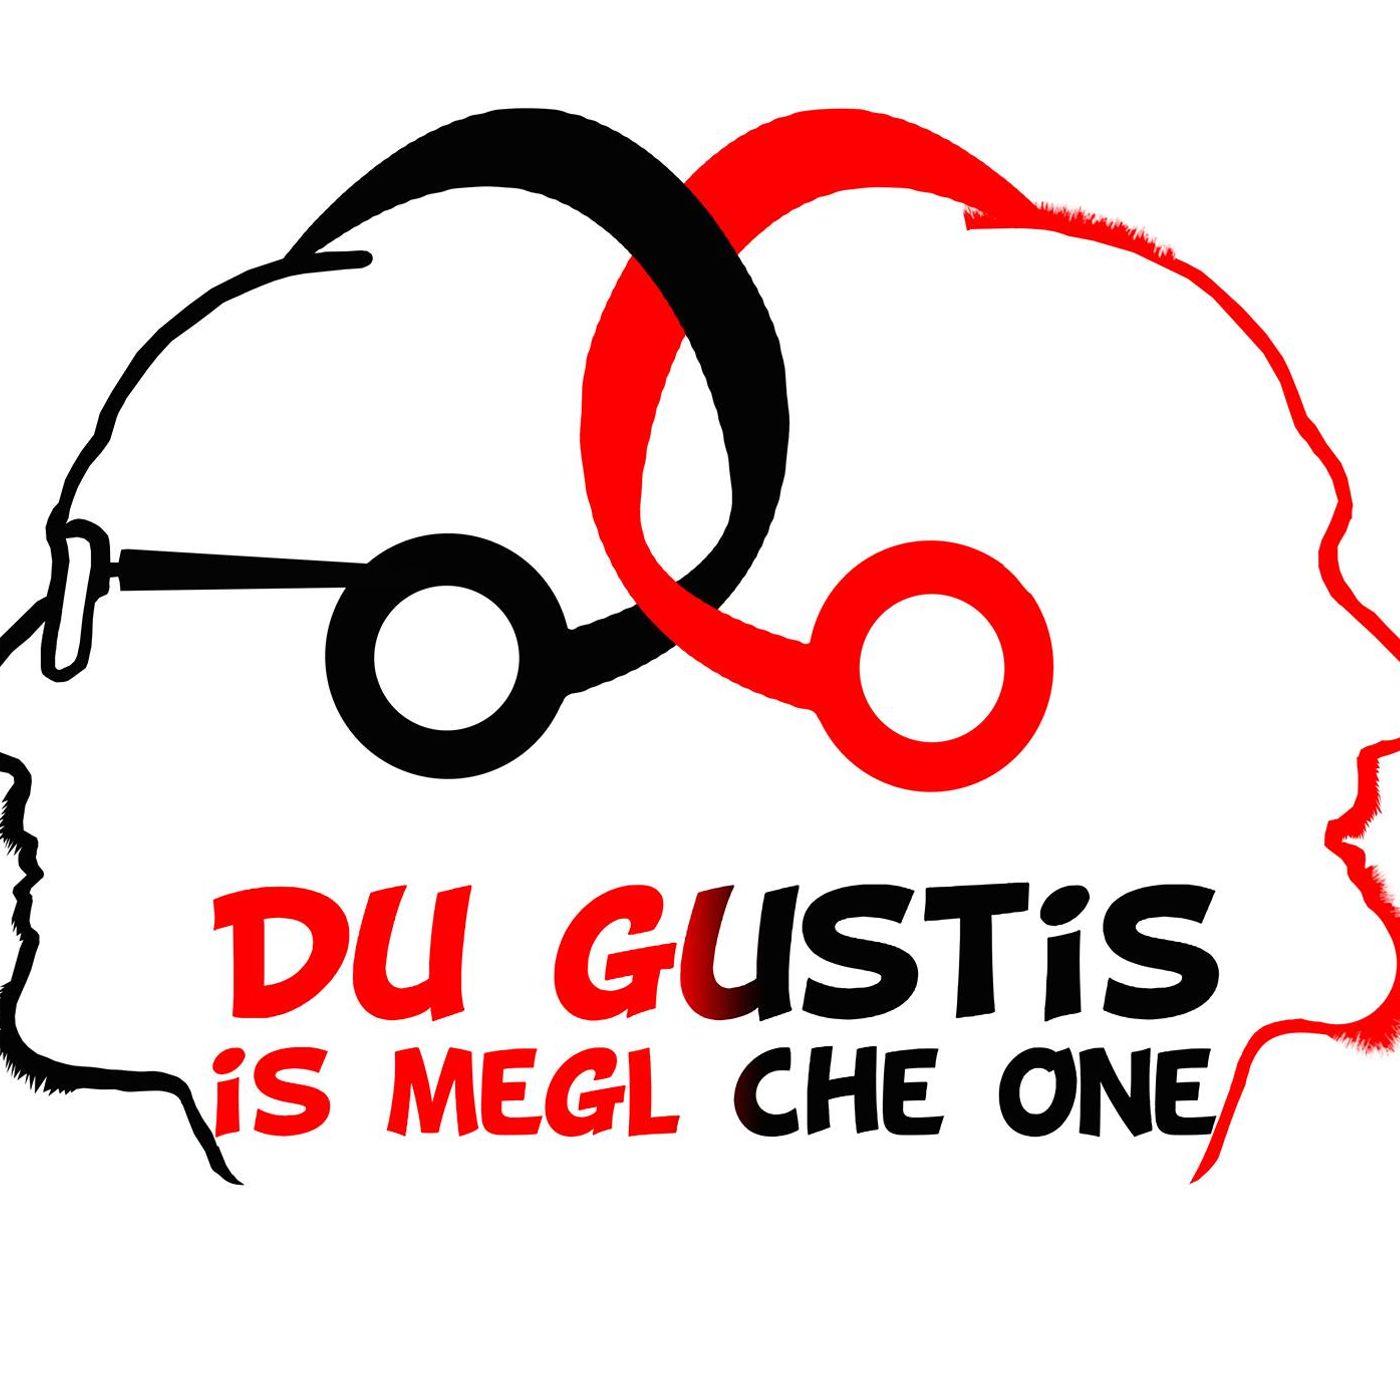 Podcast Du gustis is megl che One 2^ stagione